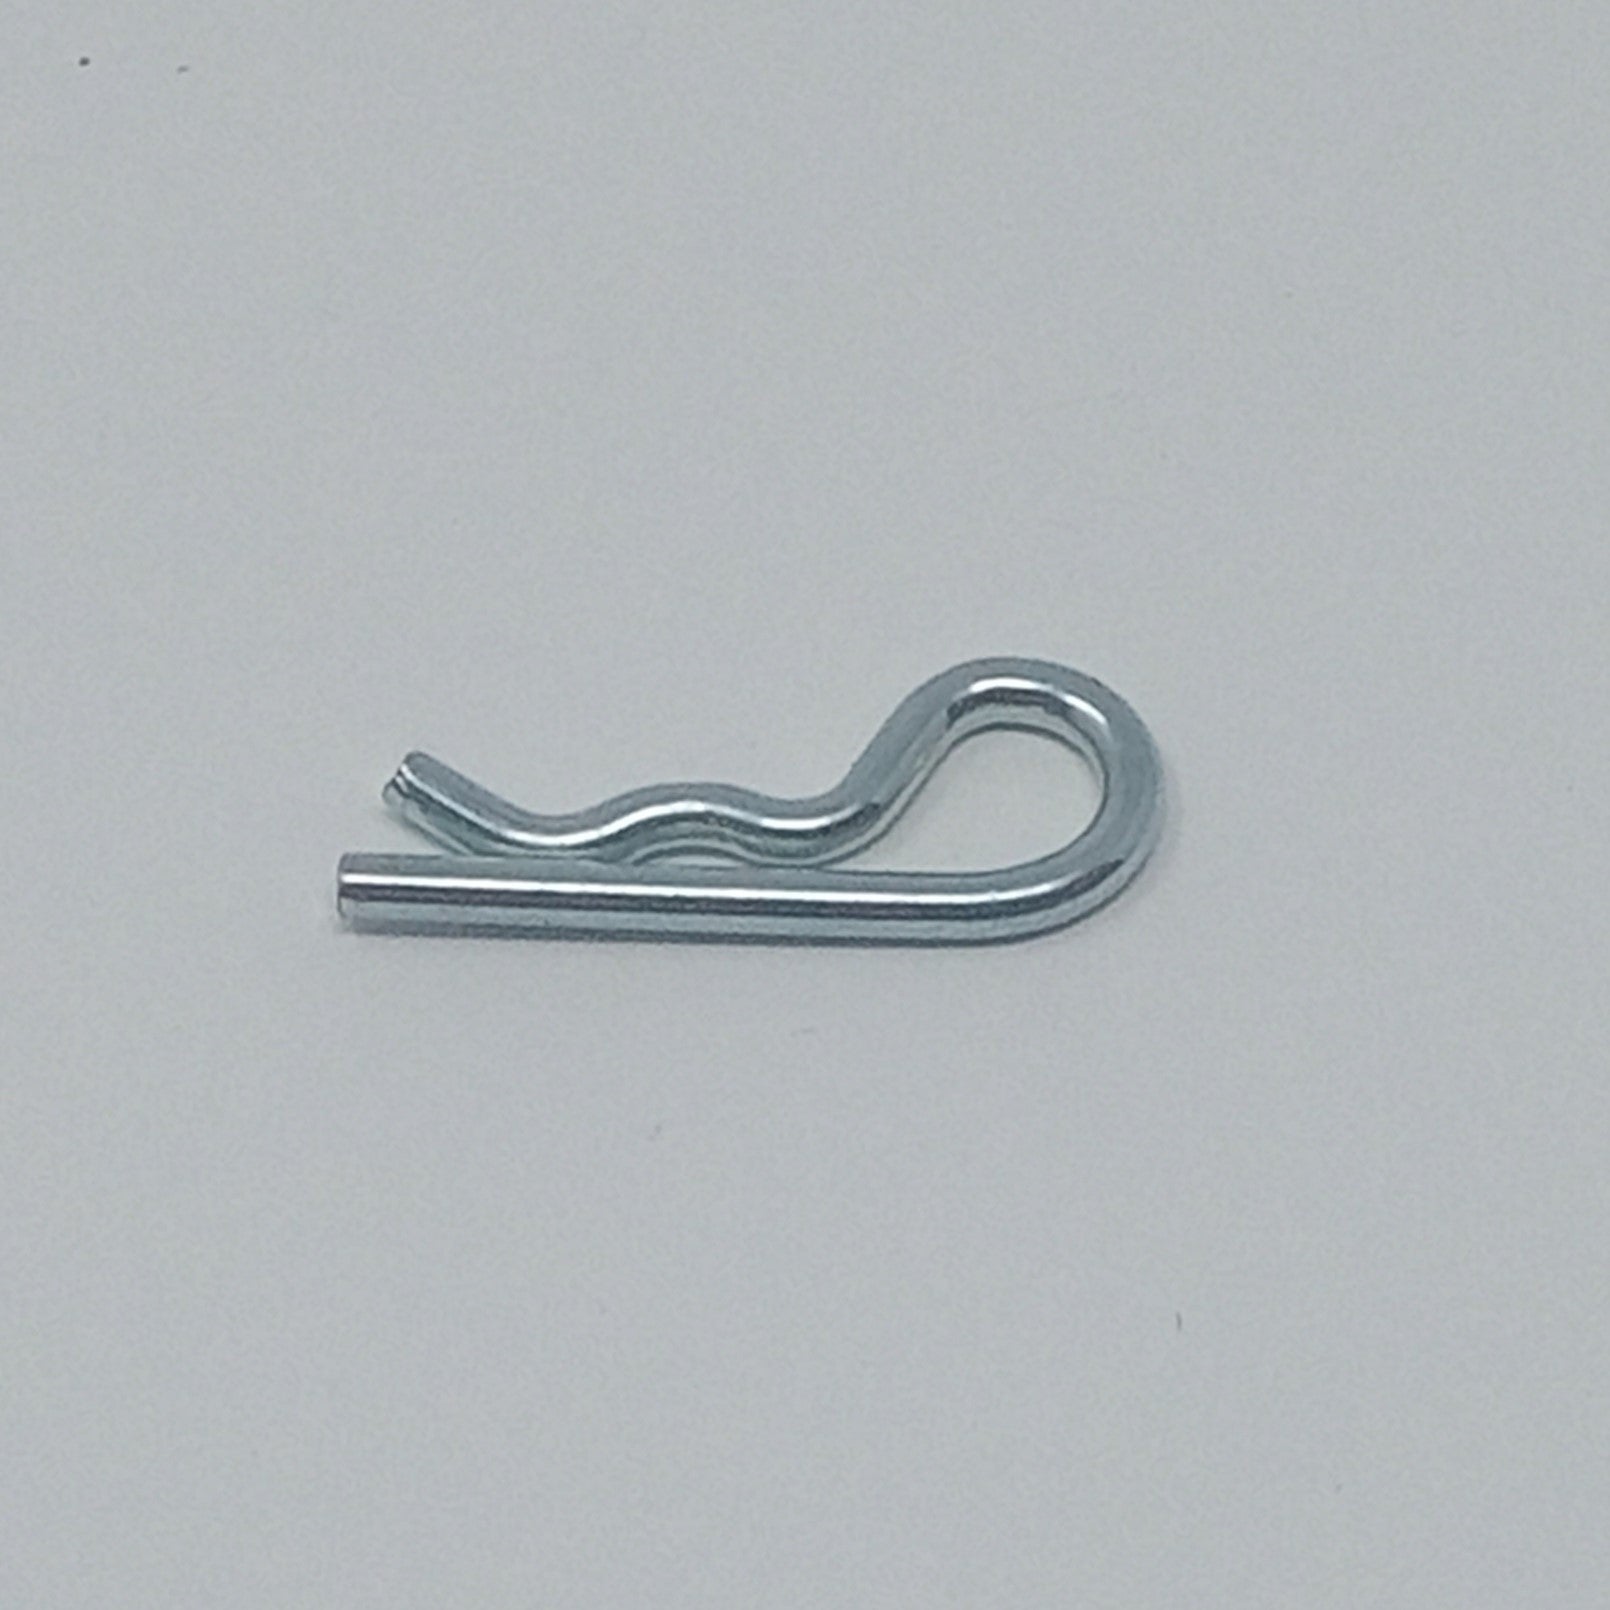 ST-12273 Hairpin Clip 1/8-3/16